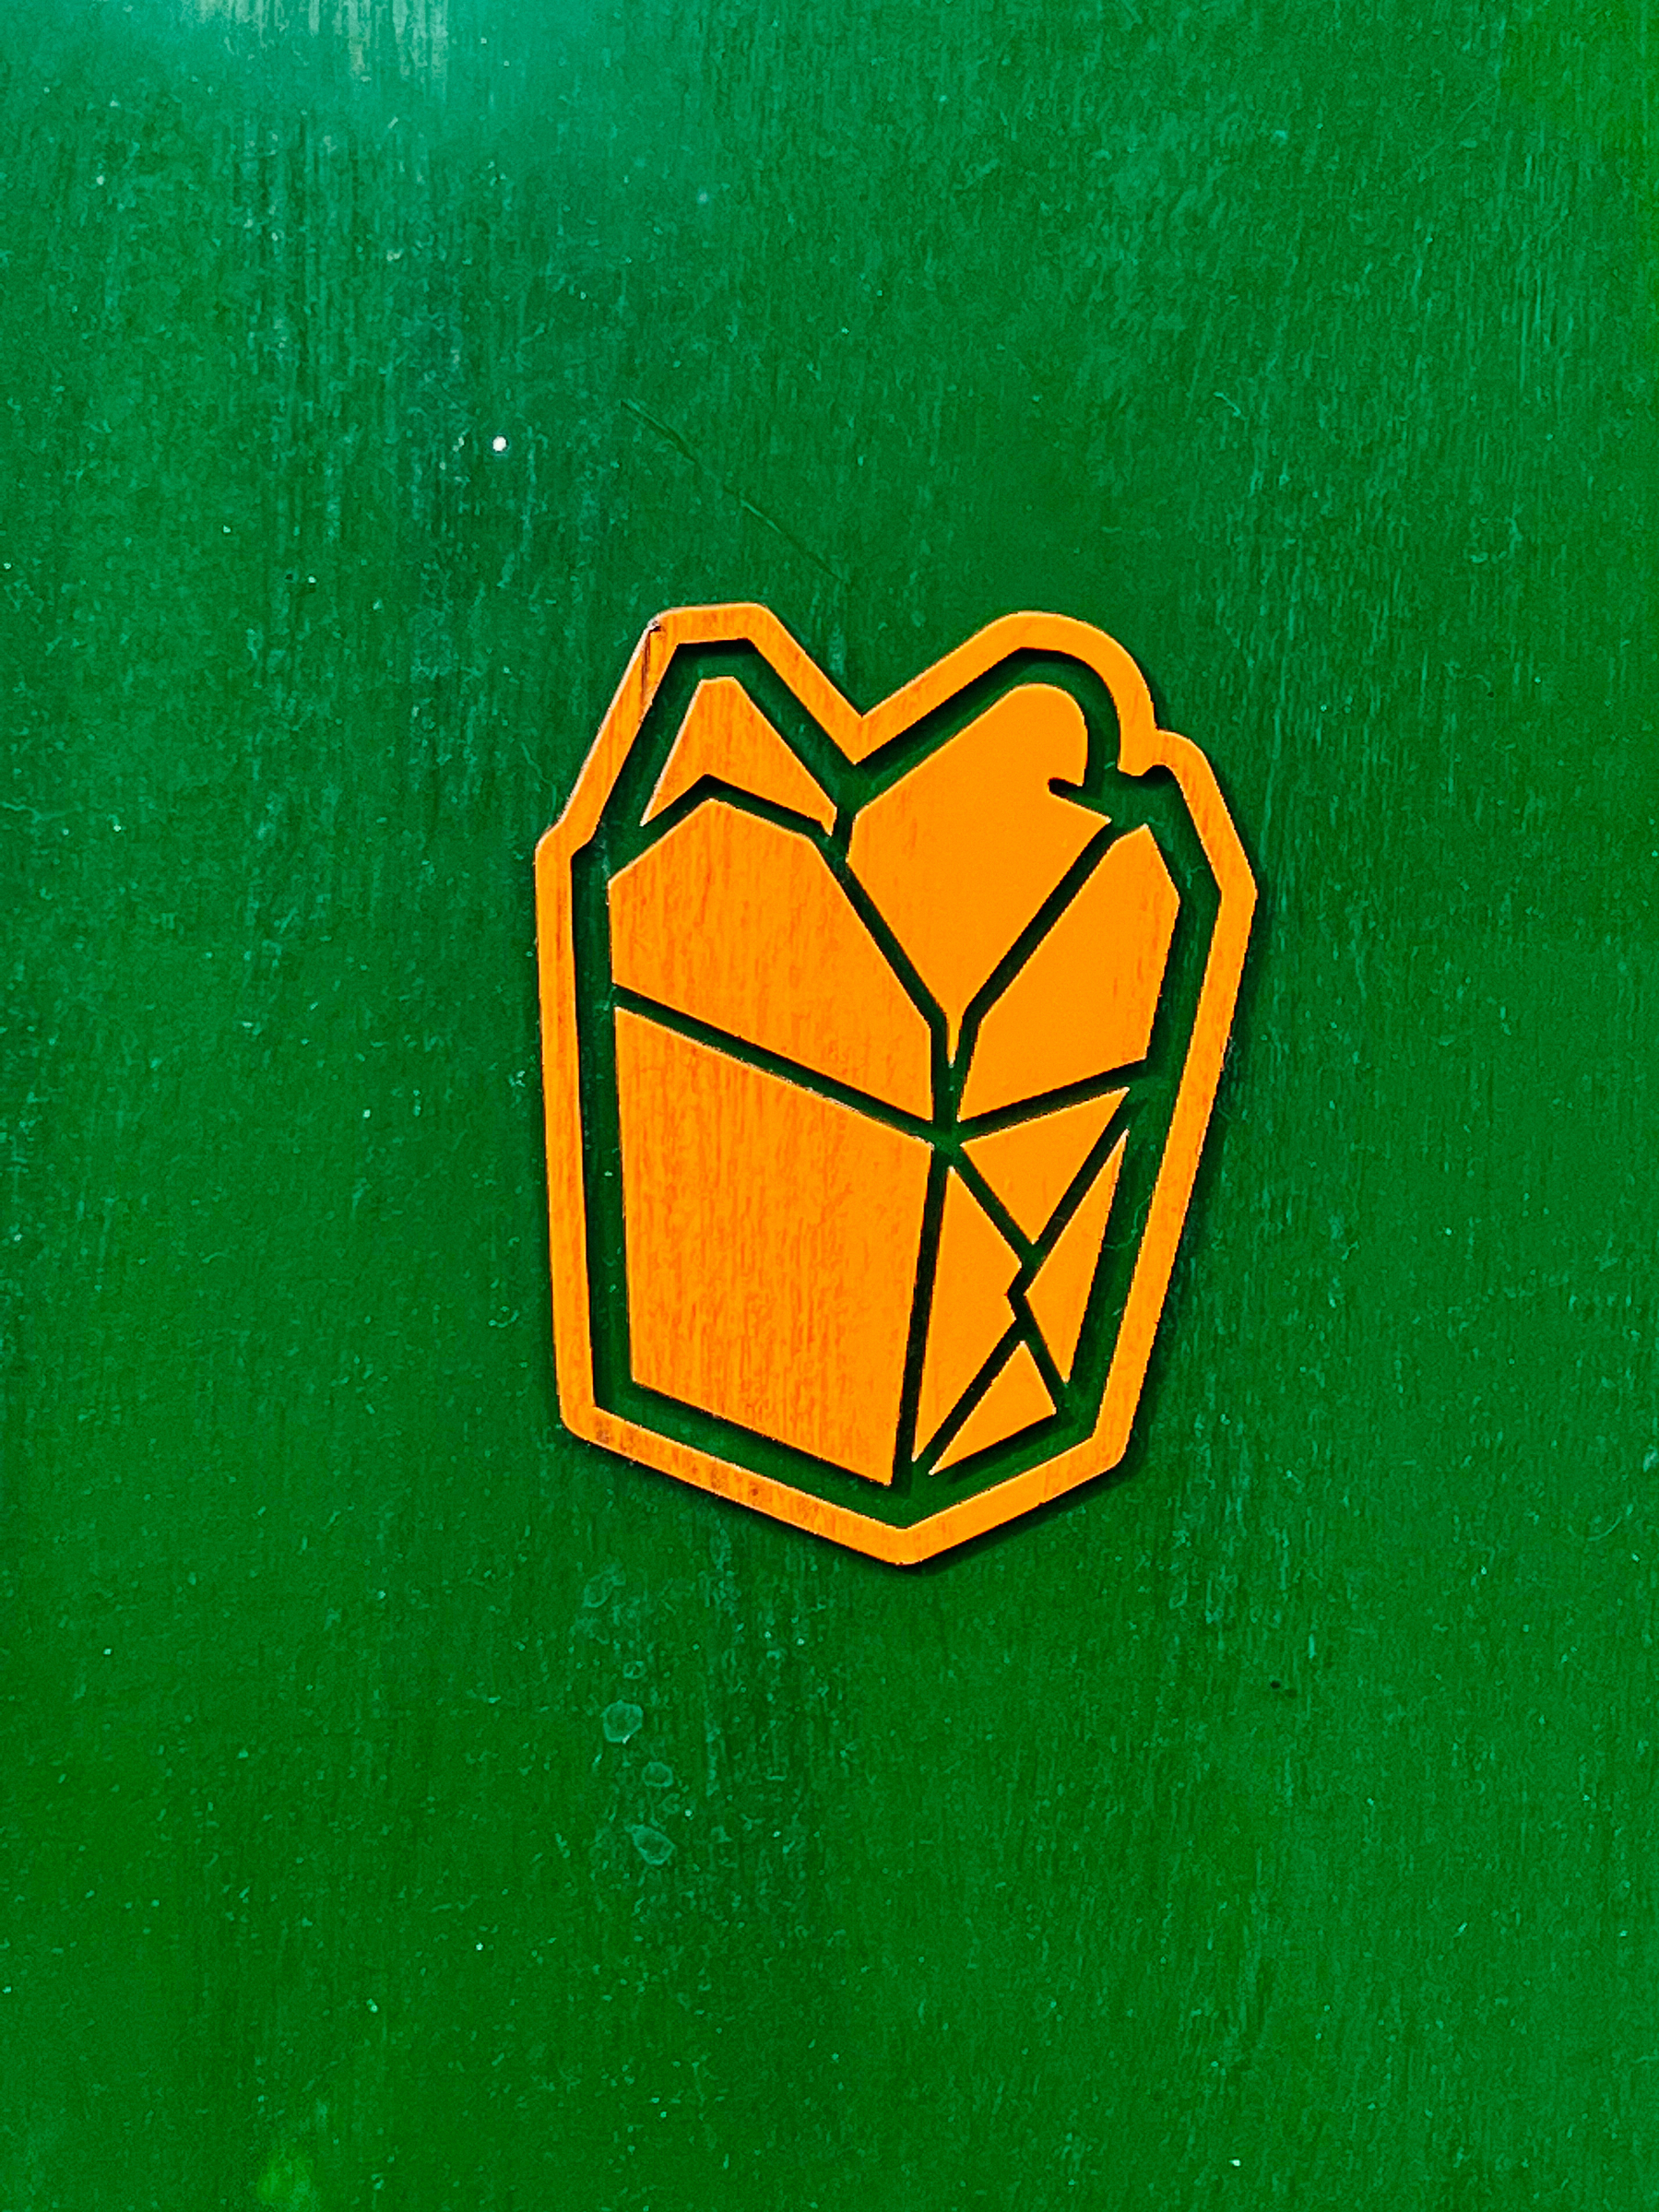 Sticker of an orange Chinese takeaway container in a green background